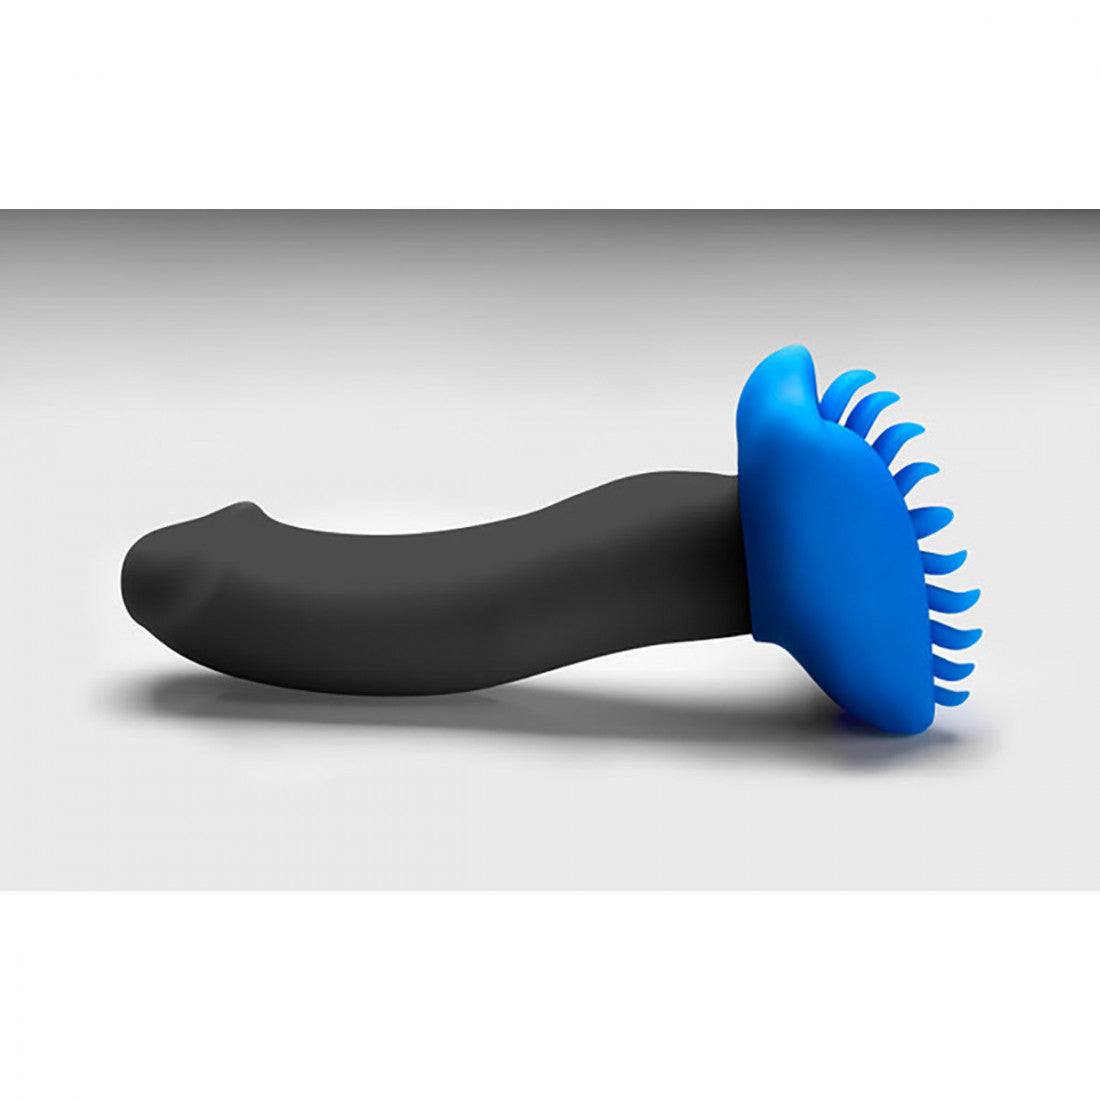 The side view of the blue Shagger BumpHer Silicone Dildo Attachment with black dildo.